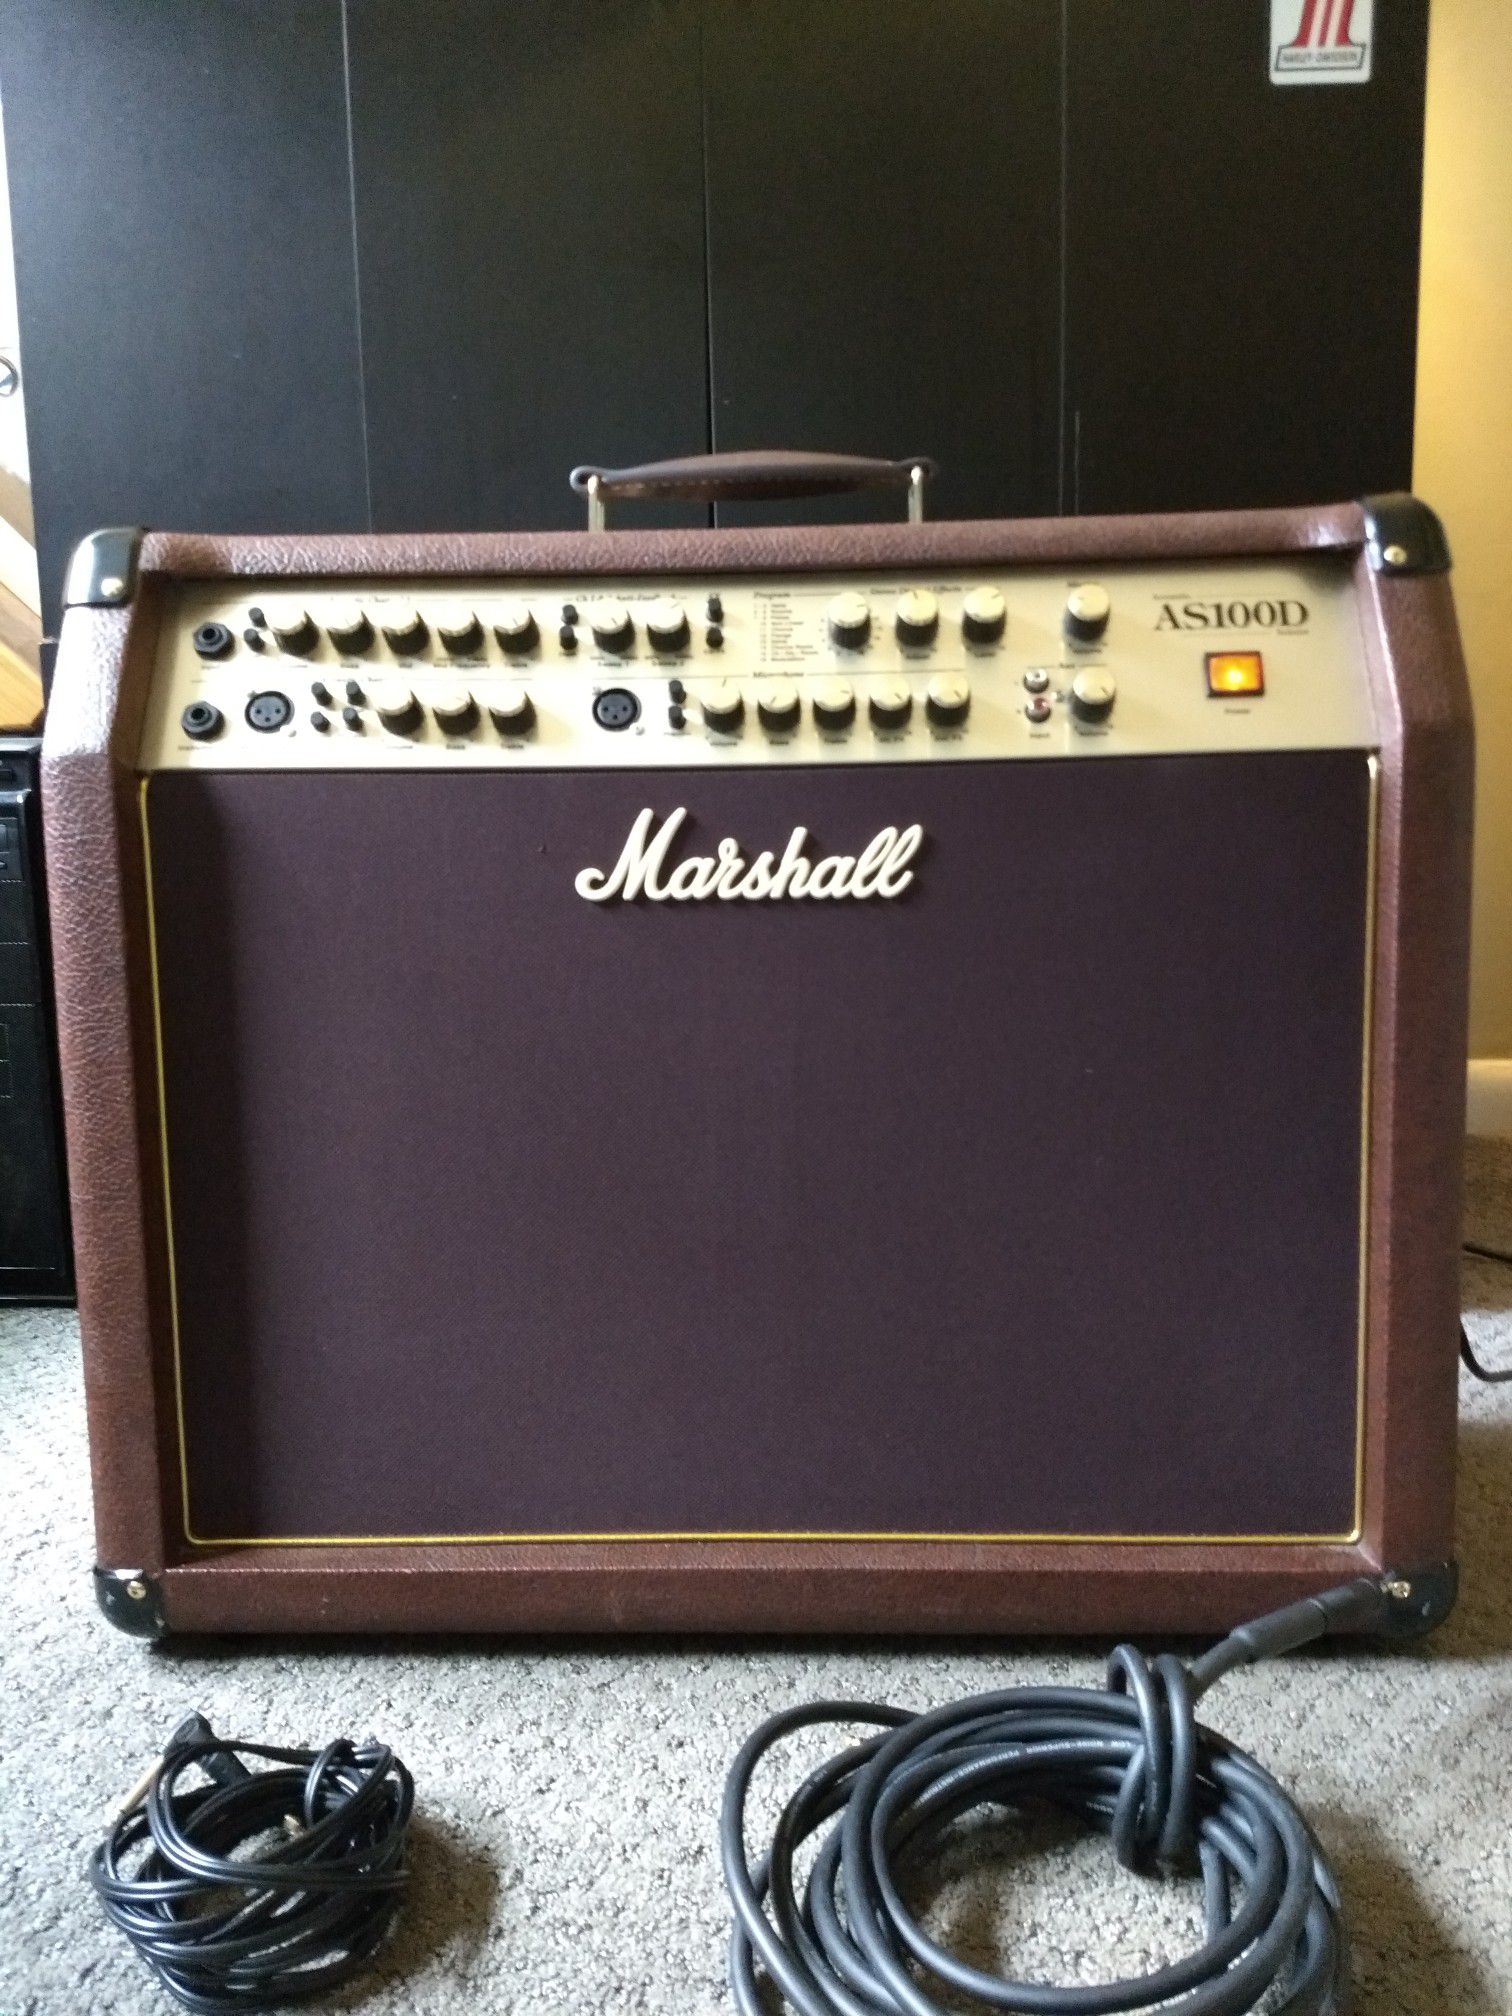 Marshall AS100D acoustic guitar amp